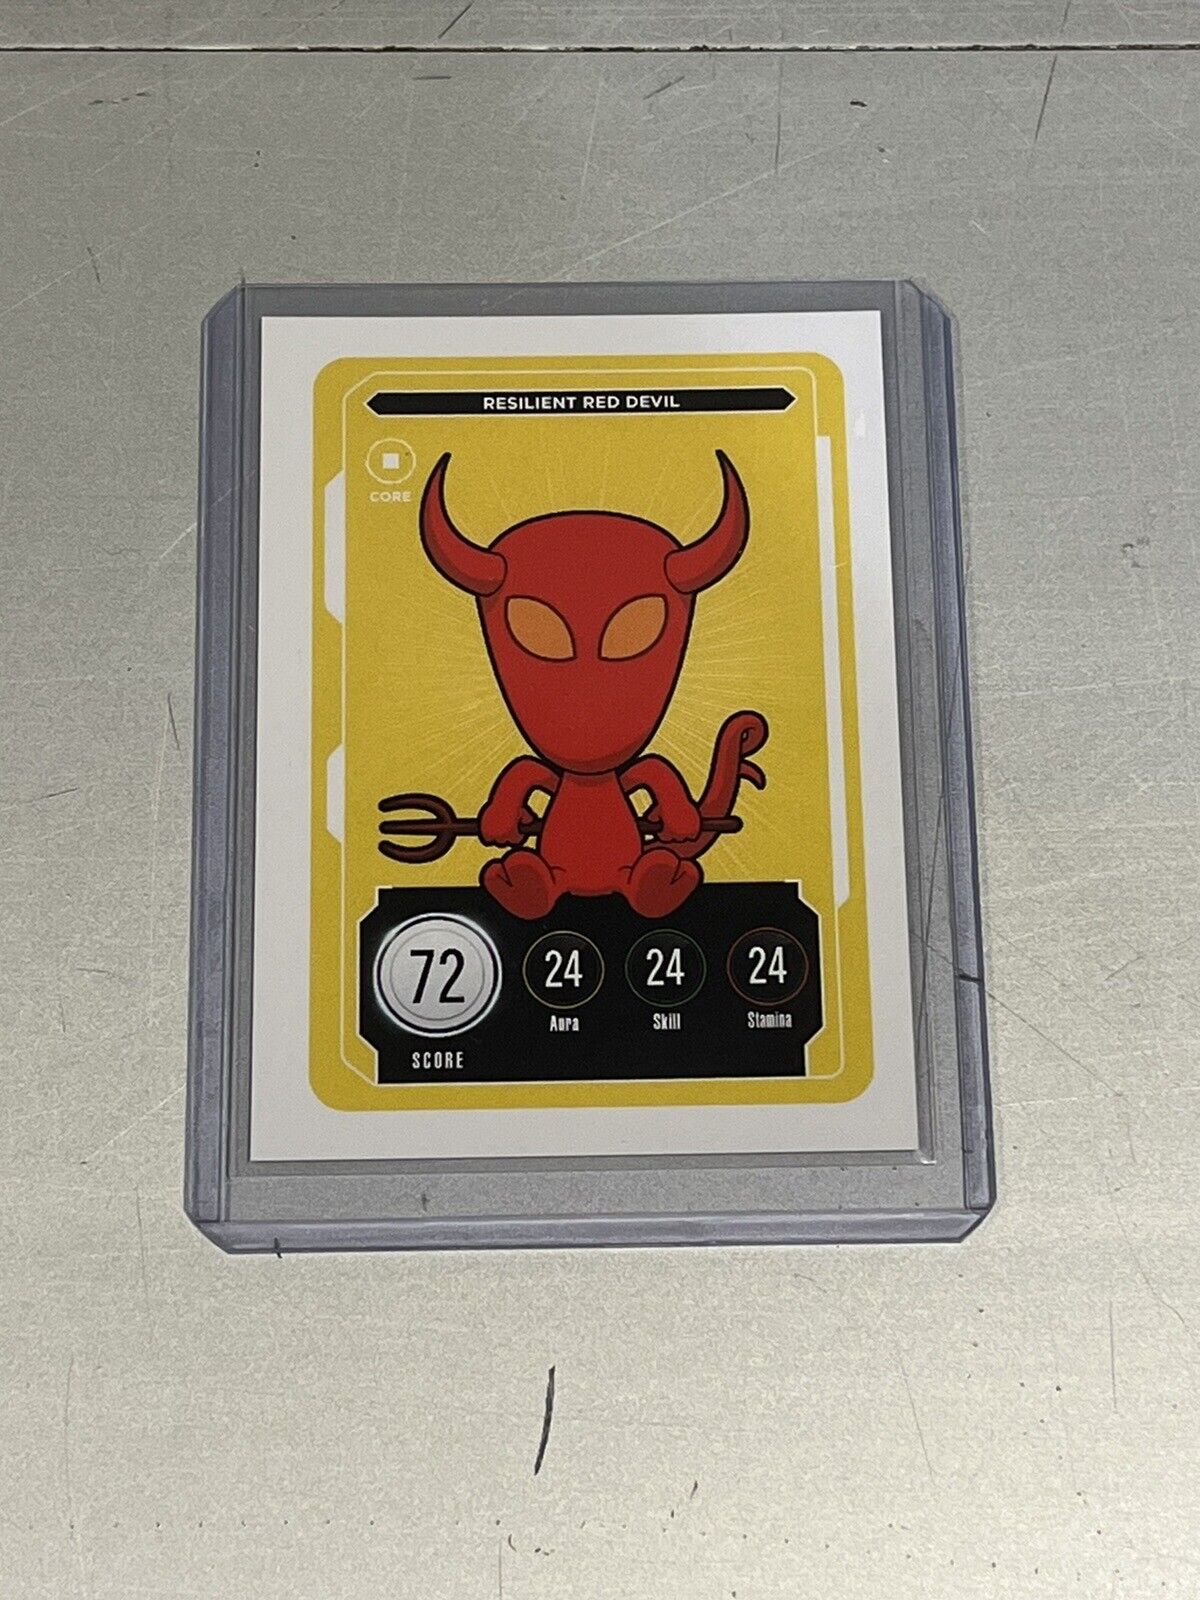 Resilient Red Devil Veefriends Series 2 Collectible Trading Card Game Gary Vee